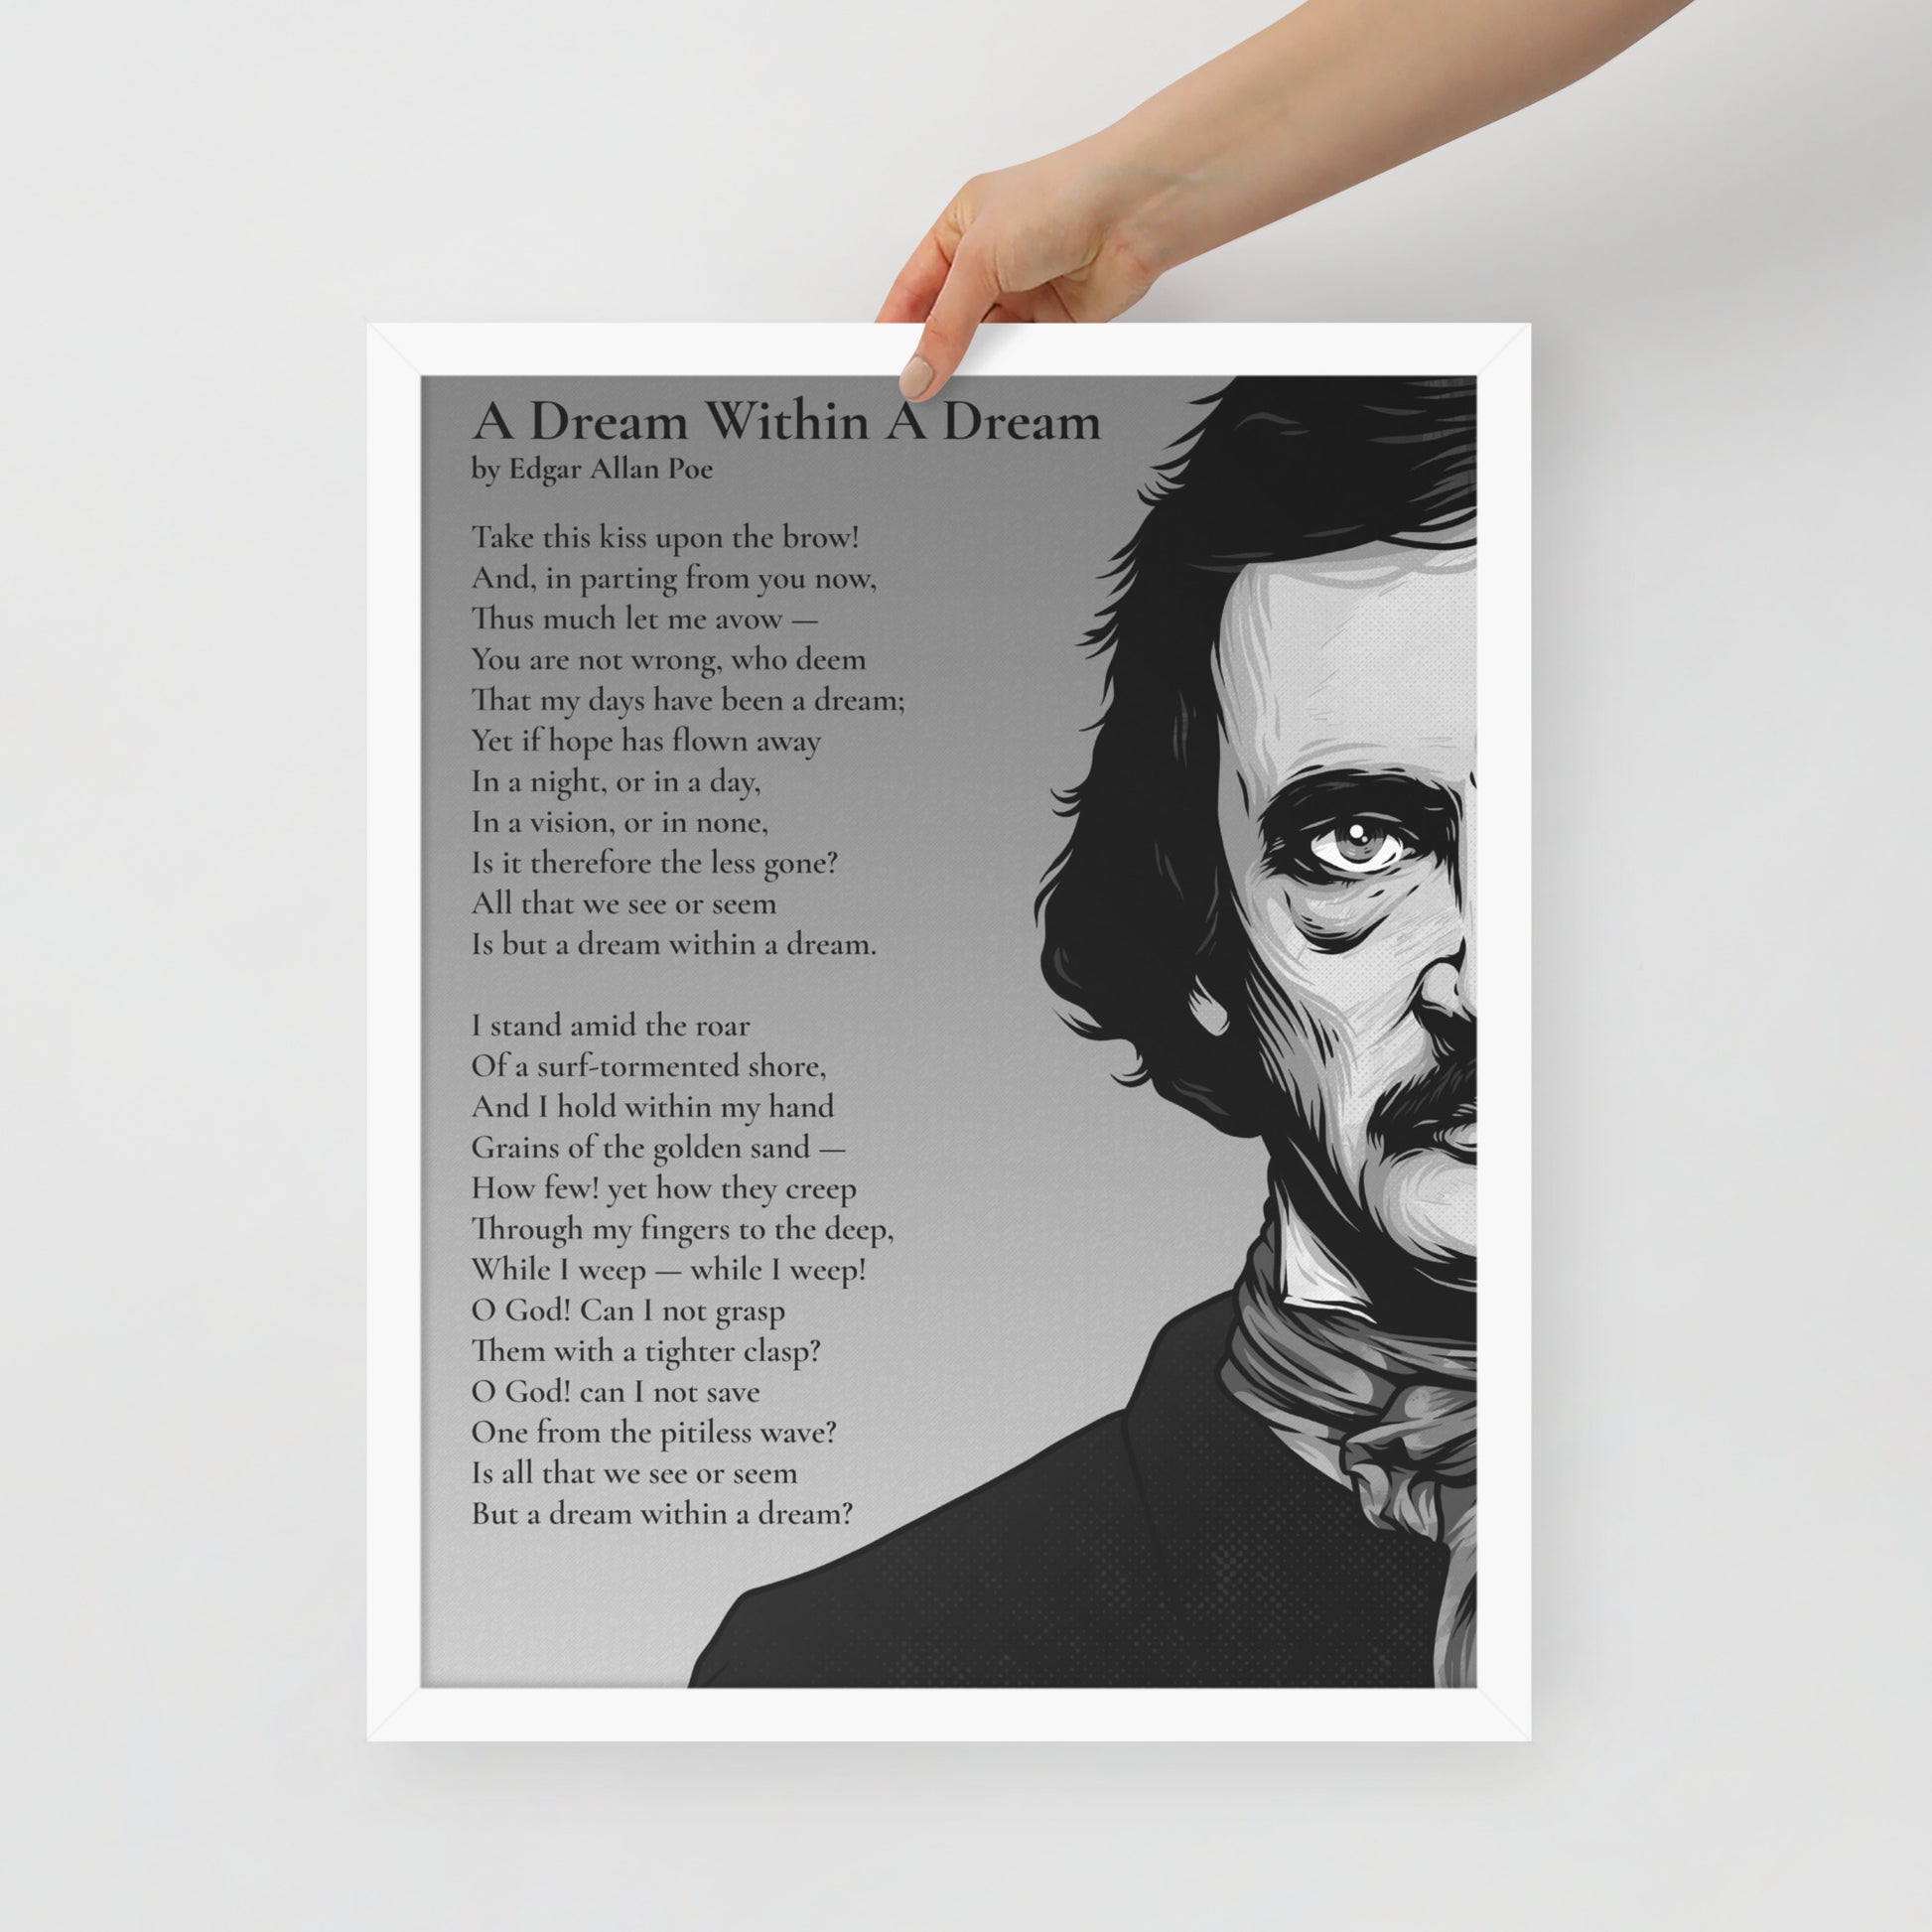 Edgar Allan Poe's 'A Dream Within a Dream' Framed Matted Poster - 16 x 20 White Frame